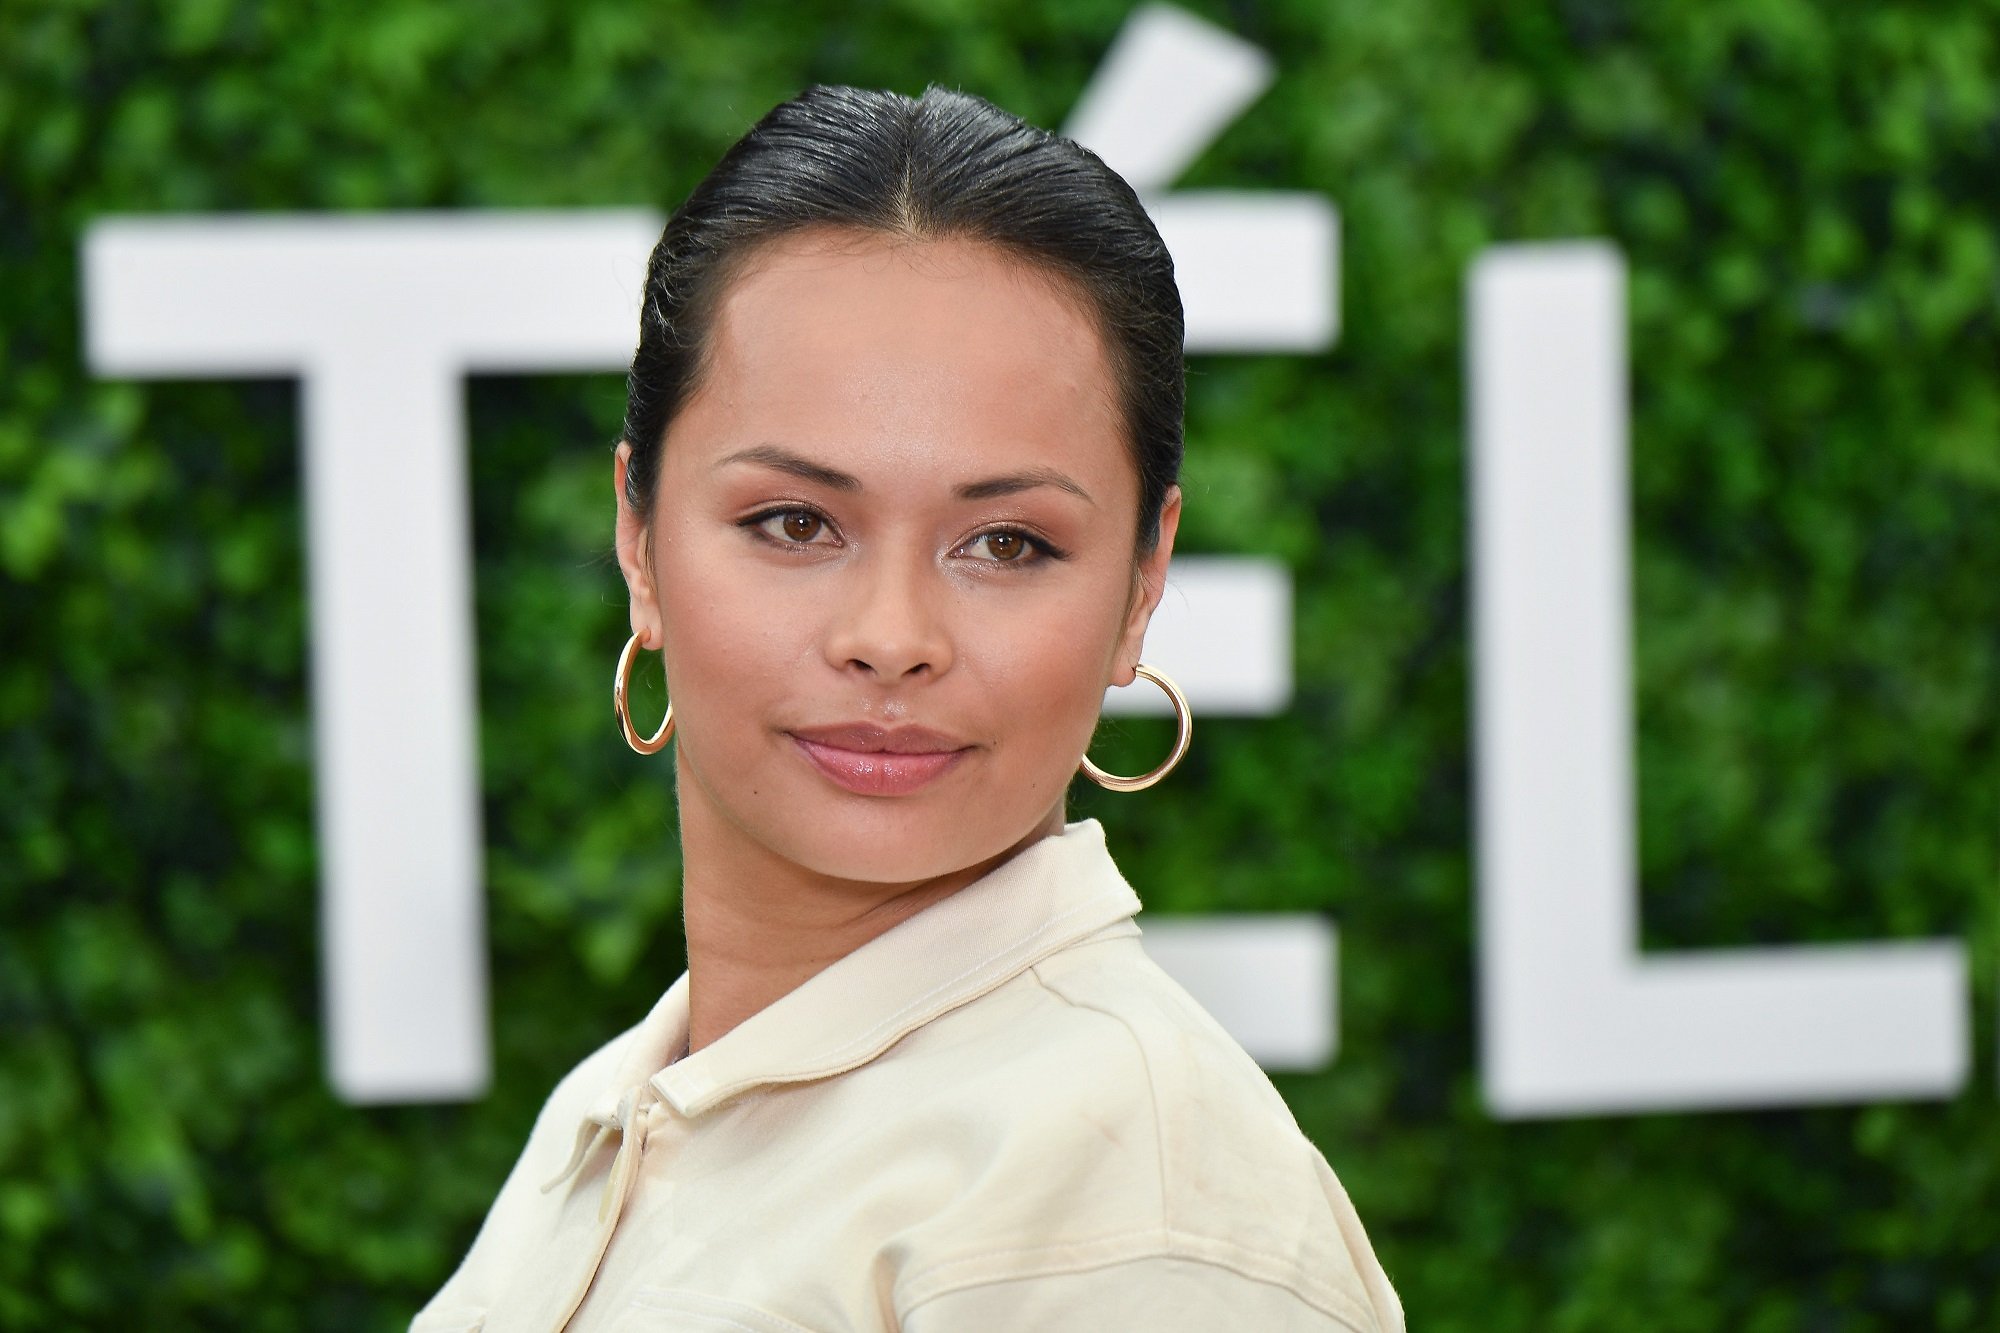 Frankie Adams of The Expanse